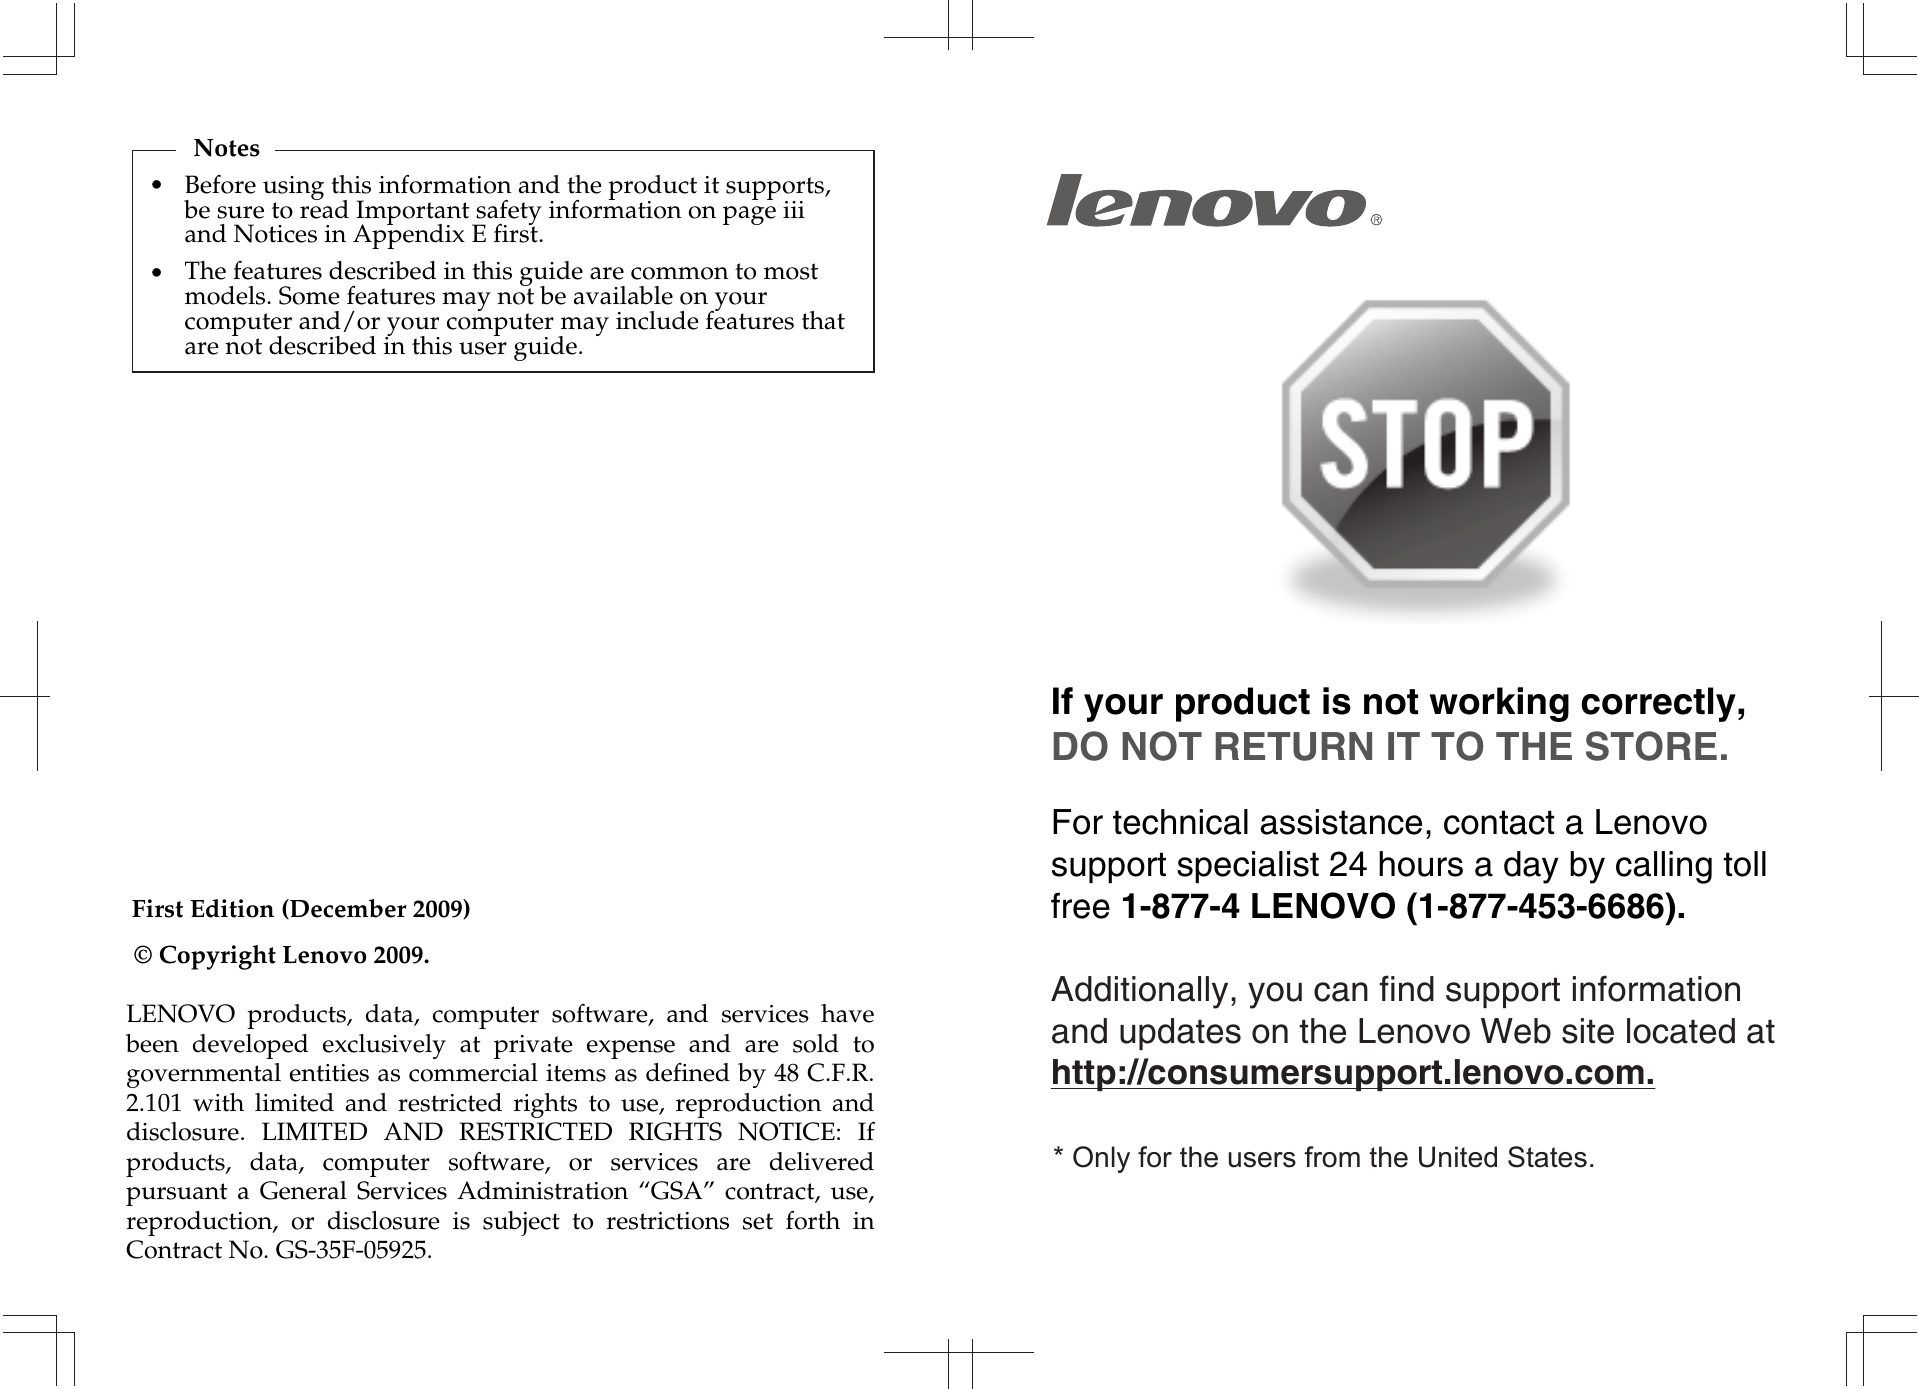 First Edition (December 2009)© Copyright Lenovo 2009. If your product is not working correctly, DO NOT RETURN IT TO THE STORE.For technical assistance, contact a Lenovo support specialist 24 hours a day by calling toll free 1-877-4 LENOVO (1-877-453-6686).   Additionally, you can find support information and updates on the Lenovo Web site located at http://consumersupport.lenovo.com.* Only for the users from the United States.•NotesBefore using this information and the product it supports, be sure to read Important safety information on page iii and Notices in Appendix E first.•The features described in this guide are common to most models. Some features may not be available on your computer and/or your computer may include features that are not described in this user guide.LENOVO  products,  data,  computer  software,  and  services  have been  developed  exclusively  at  private  expense  and  are  sold  to governmental entities as commercial items as defined by 48 C.F.R. 2.101  with  limited  and  restricted  rights  to  use,  reproduction  and disclosure.  LIMITED  AND  RESTRICTED  RIGHTS  NOTICE:  If products,  data,  computer  software,  or  services  are  delivered pursuant  a  General  Services  Administration  “GSA”  contract,  use, reproduction,  or  disclosure  is  subject  to  restrictions  set  forth  in Contract No. GS-35F-05925.